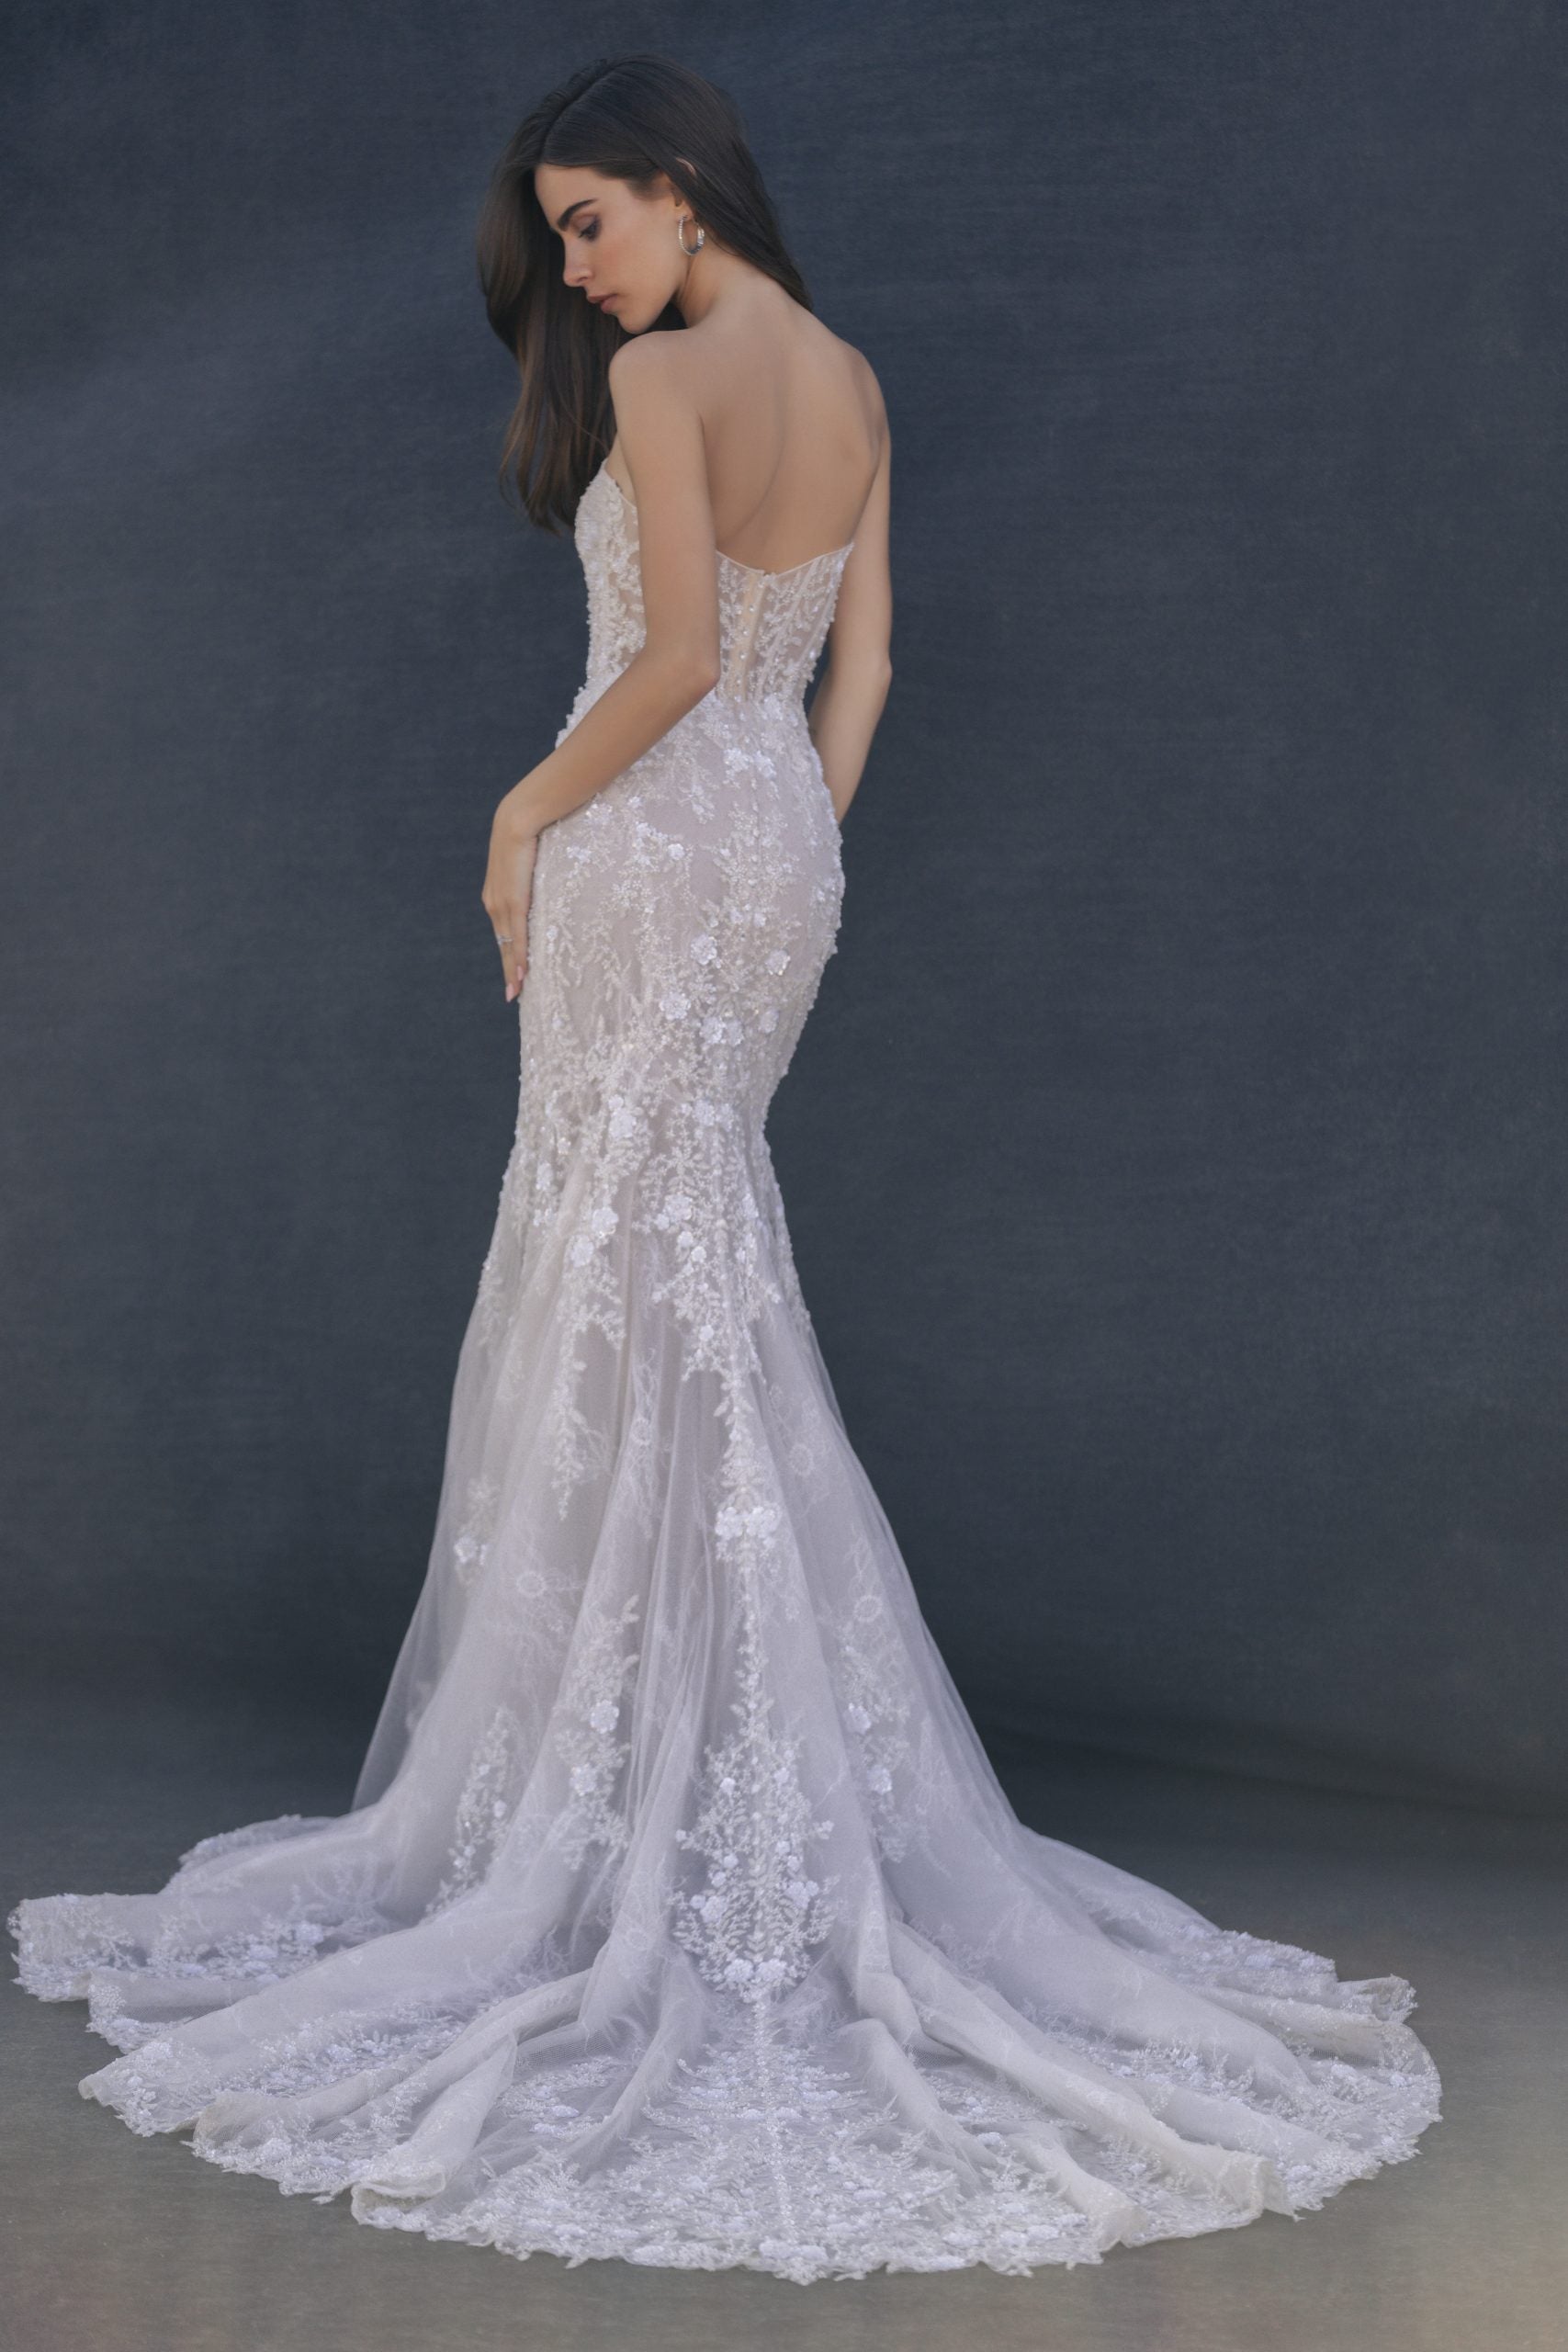 Romantic Floral Embroidered Fit-and-Flare Gown by Allure Bridals - Image 2